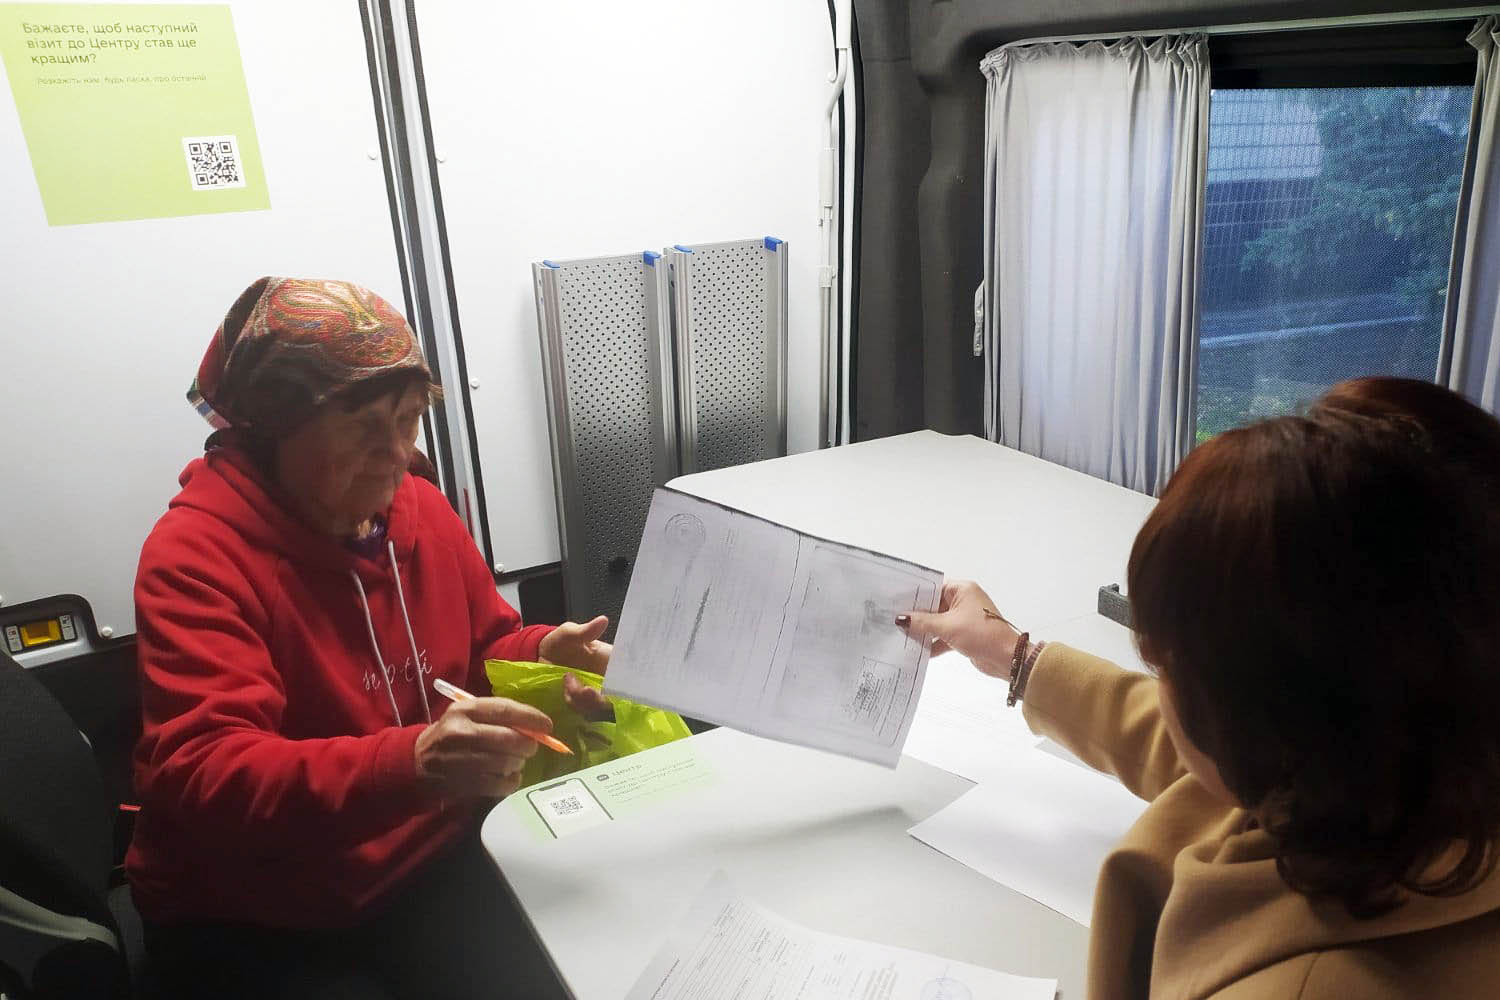 In Mezhova municipality, U-LEAD’s mobile Administrative Service Centre helps residents affected by shelling